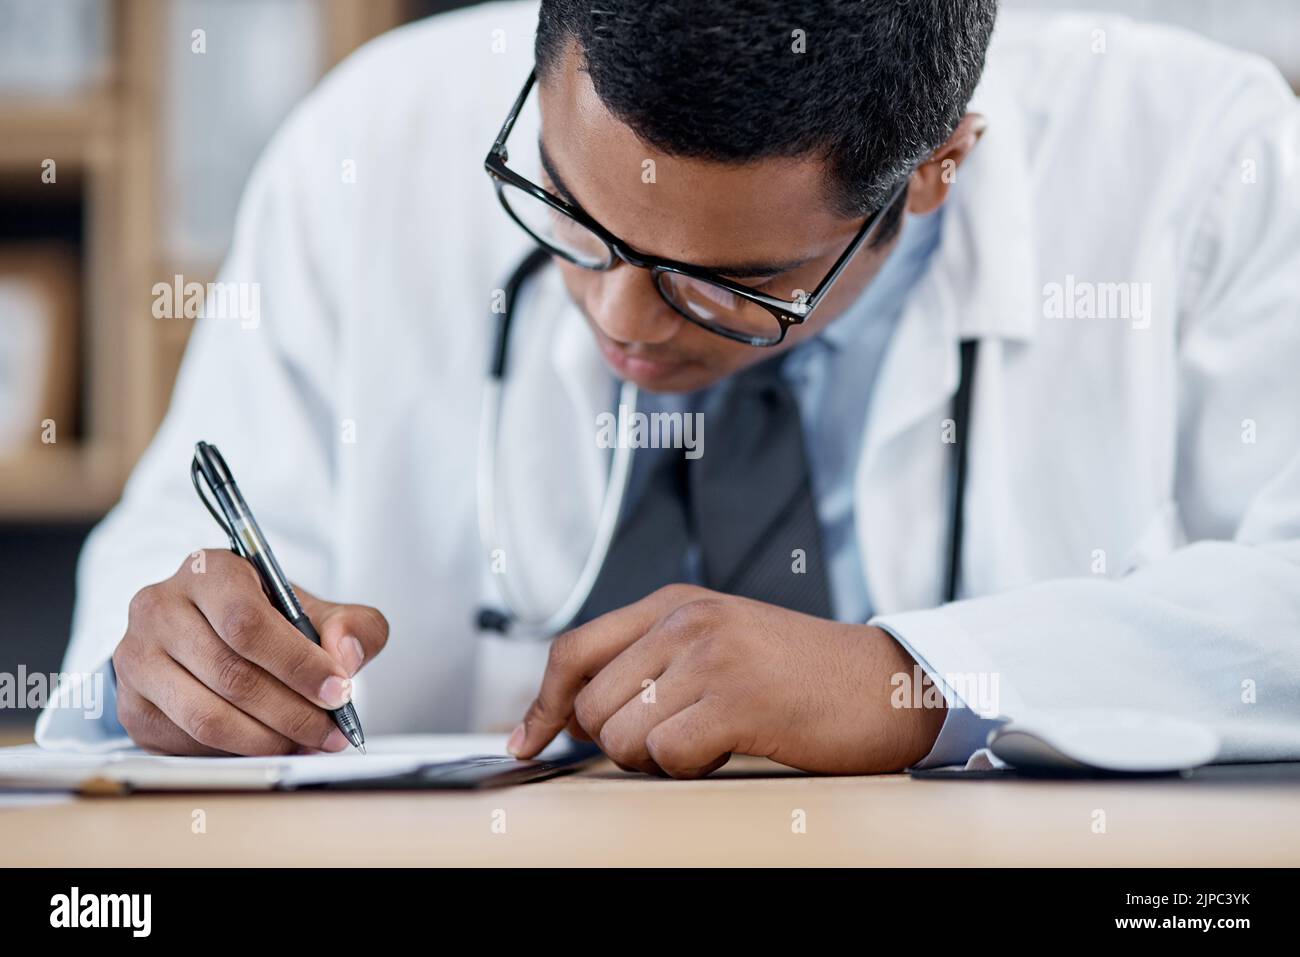 Doctor writing a prescription, survey or medical care paperwork for a patient at the hospital. A healthcare professional writing a patient information Stock Photo